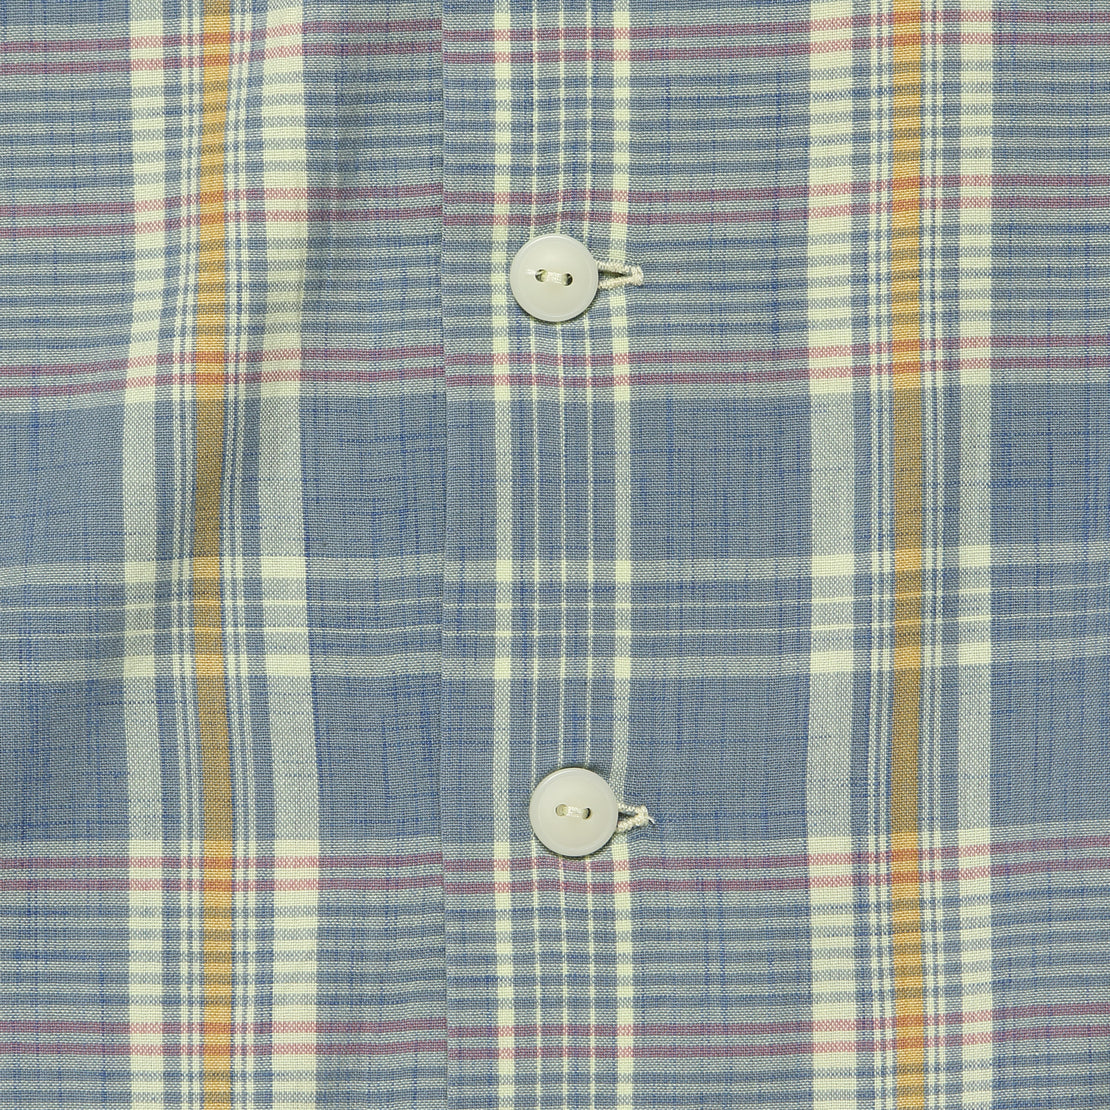 Lightweight Madras Towns Camp Shirt - Light Blue - RRL - STAG Provisions - Tops - L/S Woven - Plaid